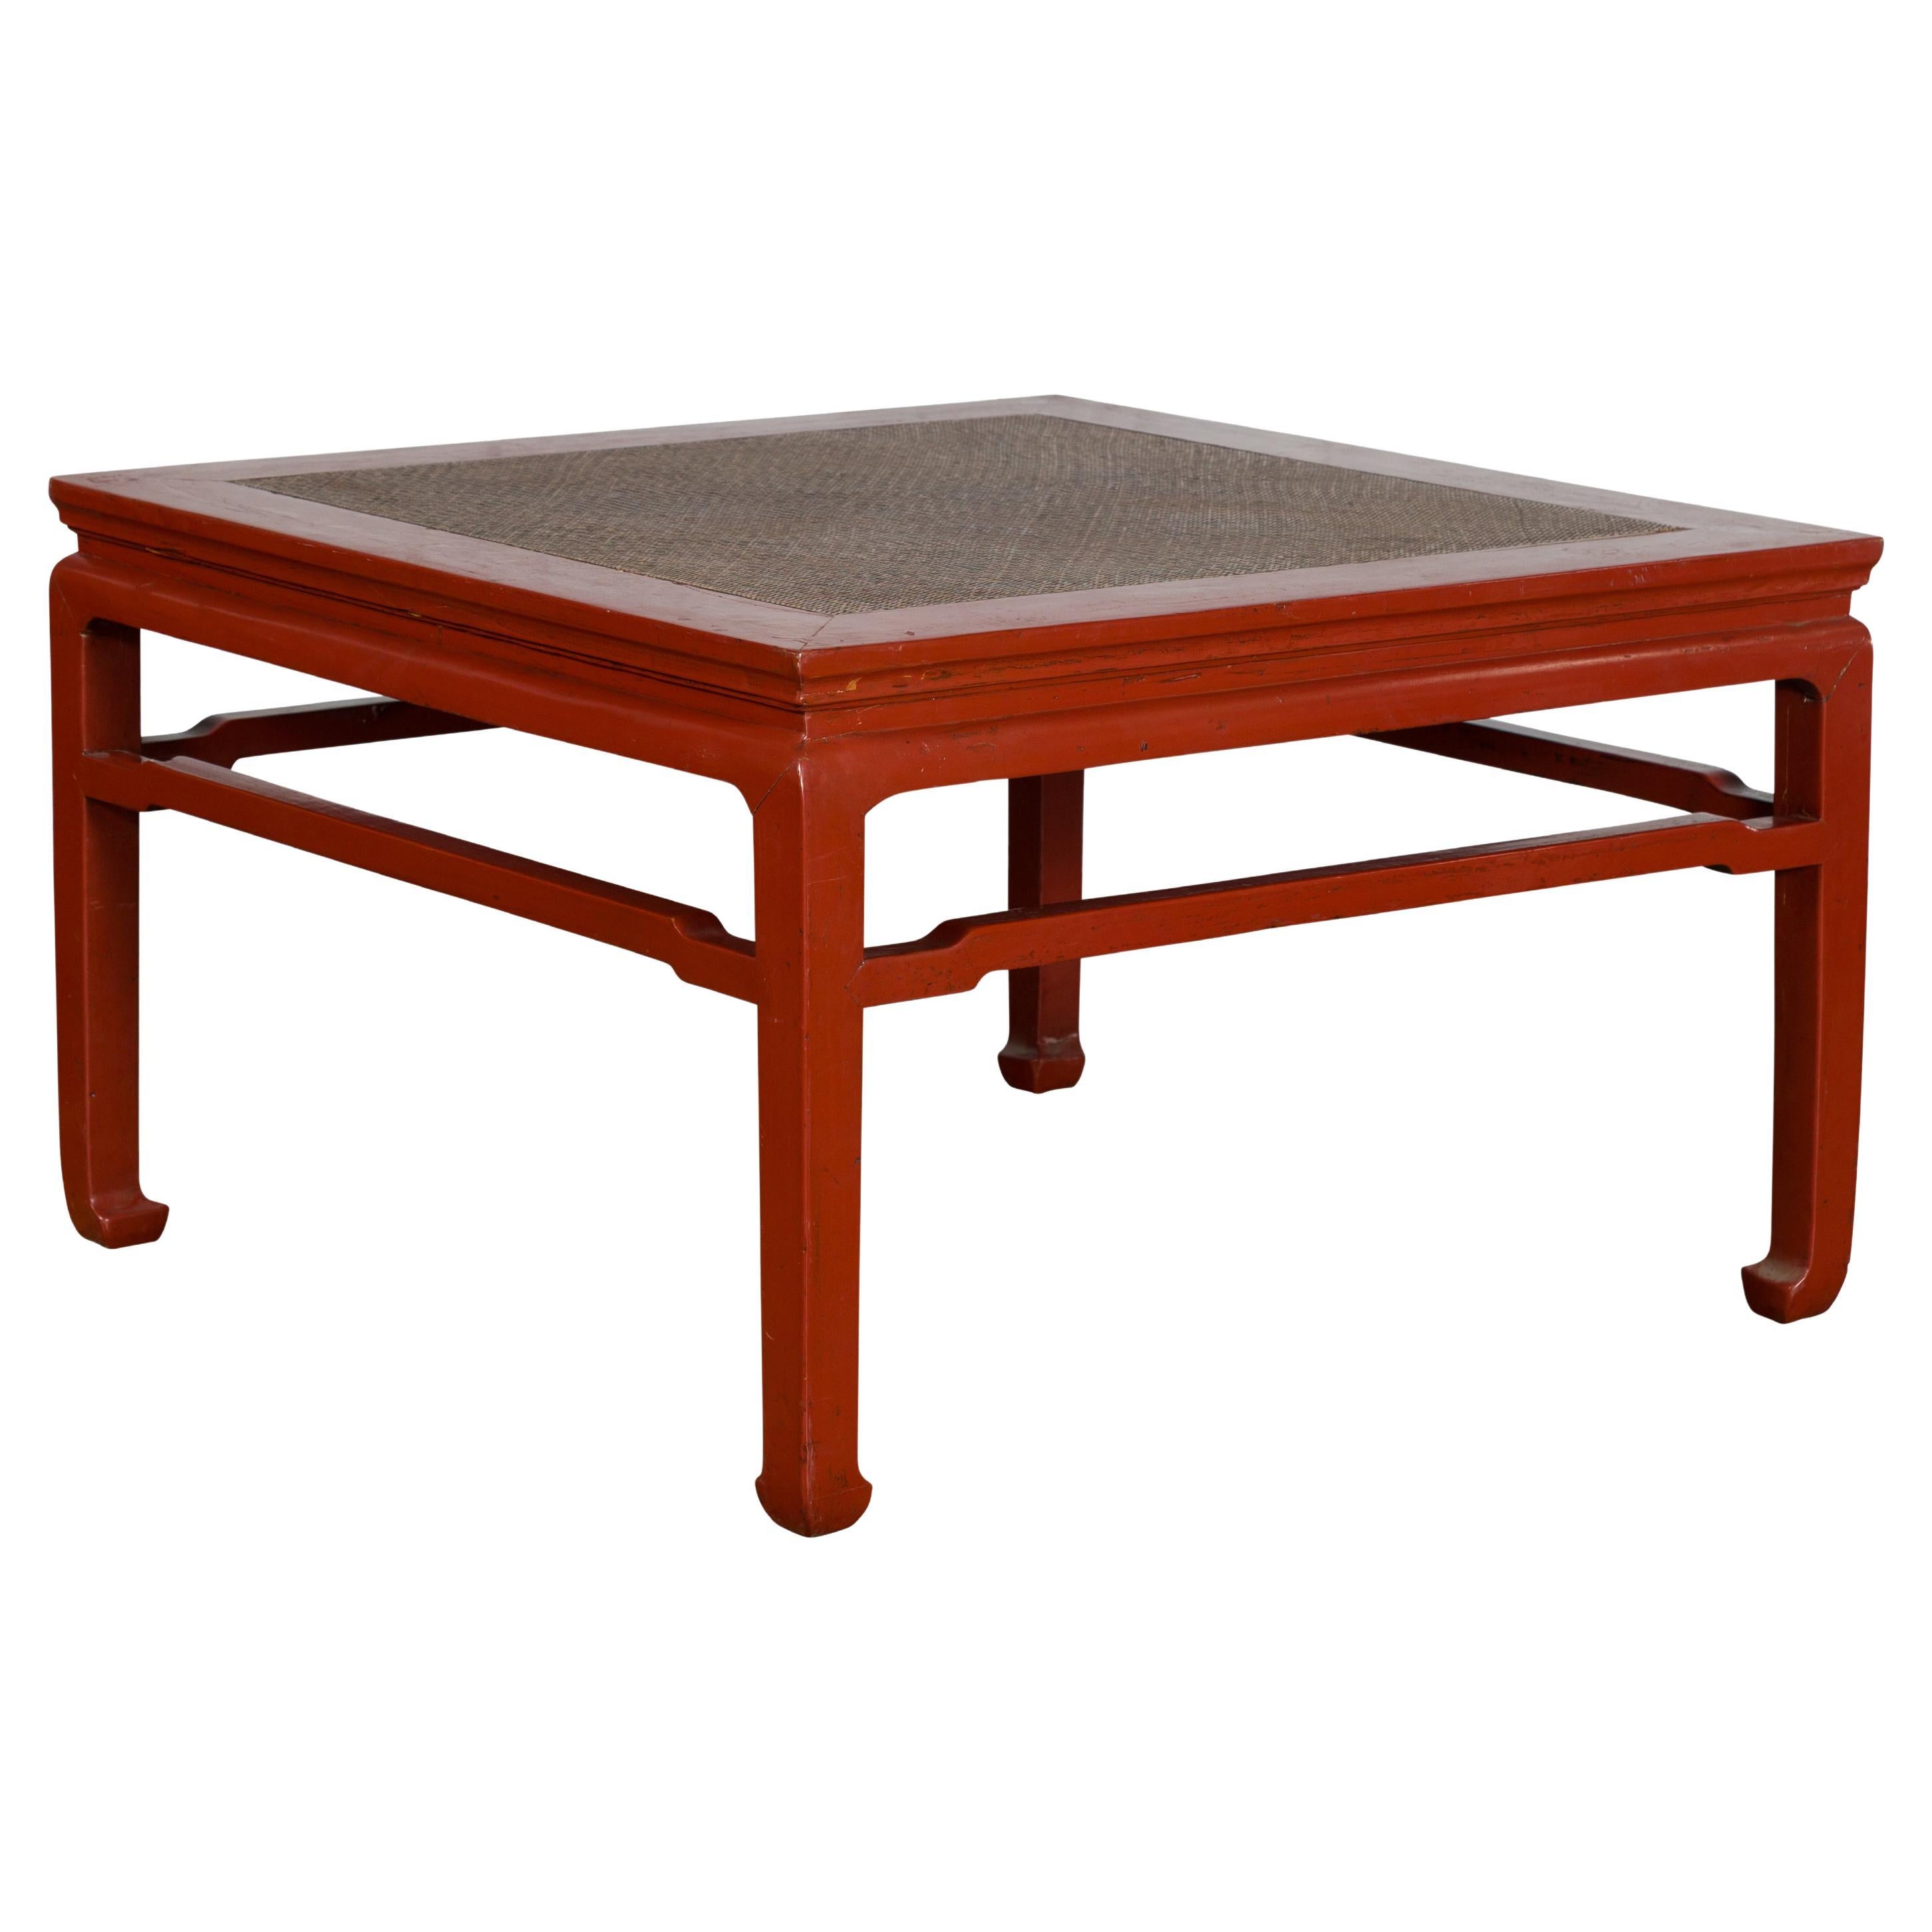 Chinese Early 20th Century Red Lacquer Coffee Table with Hand-Woven Rattan Top